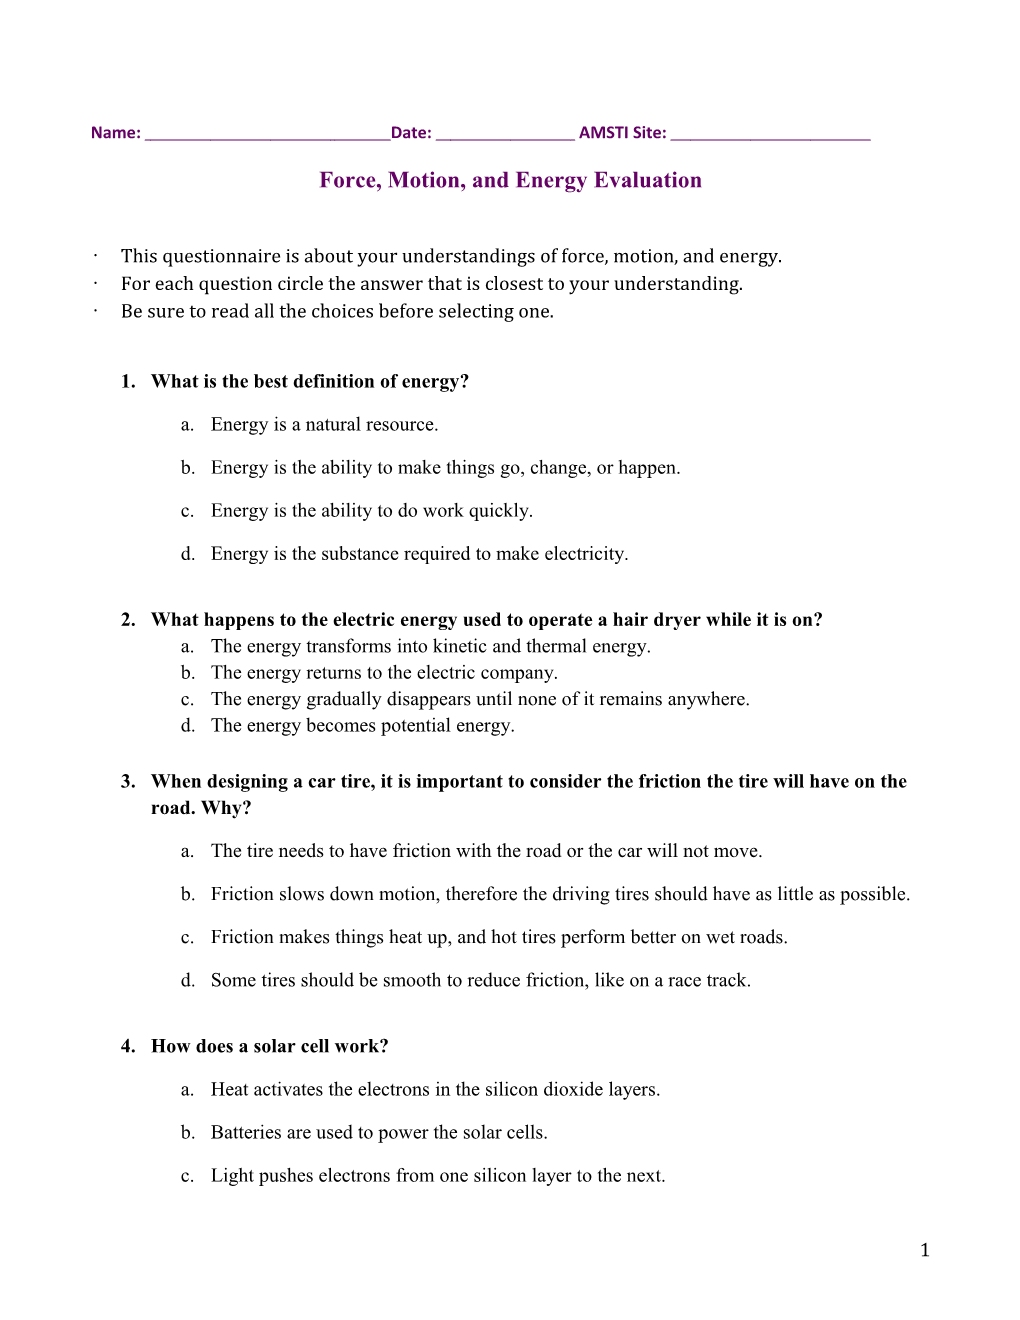 Force, Motion, and Energy Evaluation